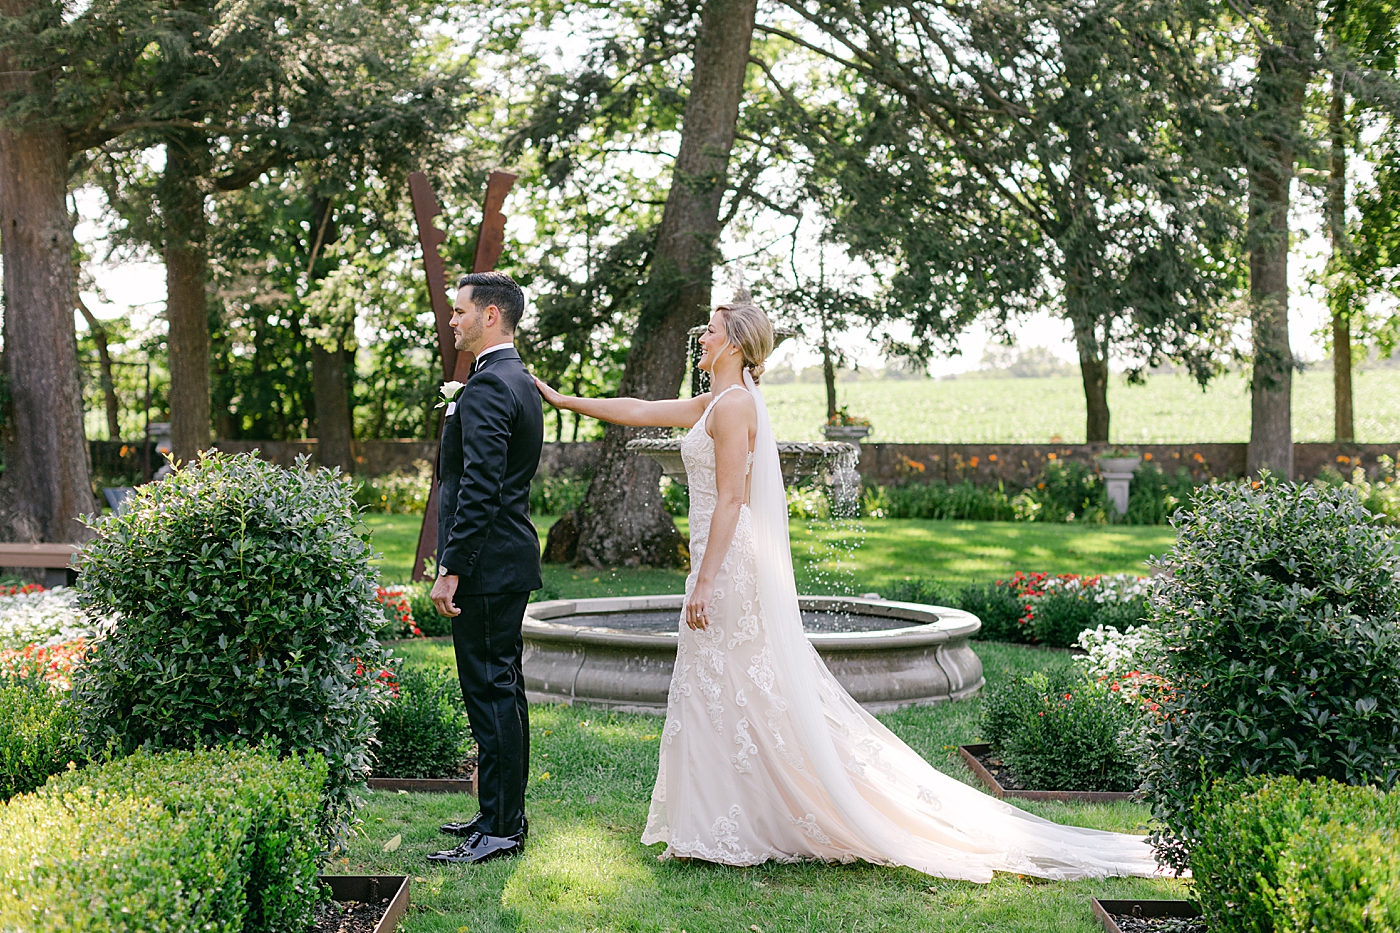 Bride and groom first look in a garden | Image by Hope Helmuth Photography